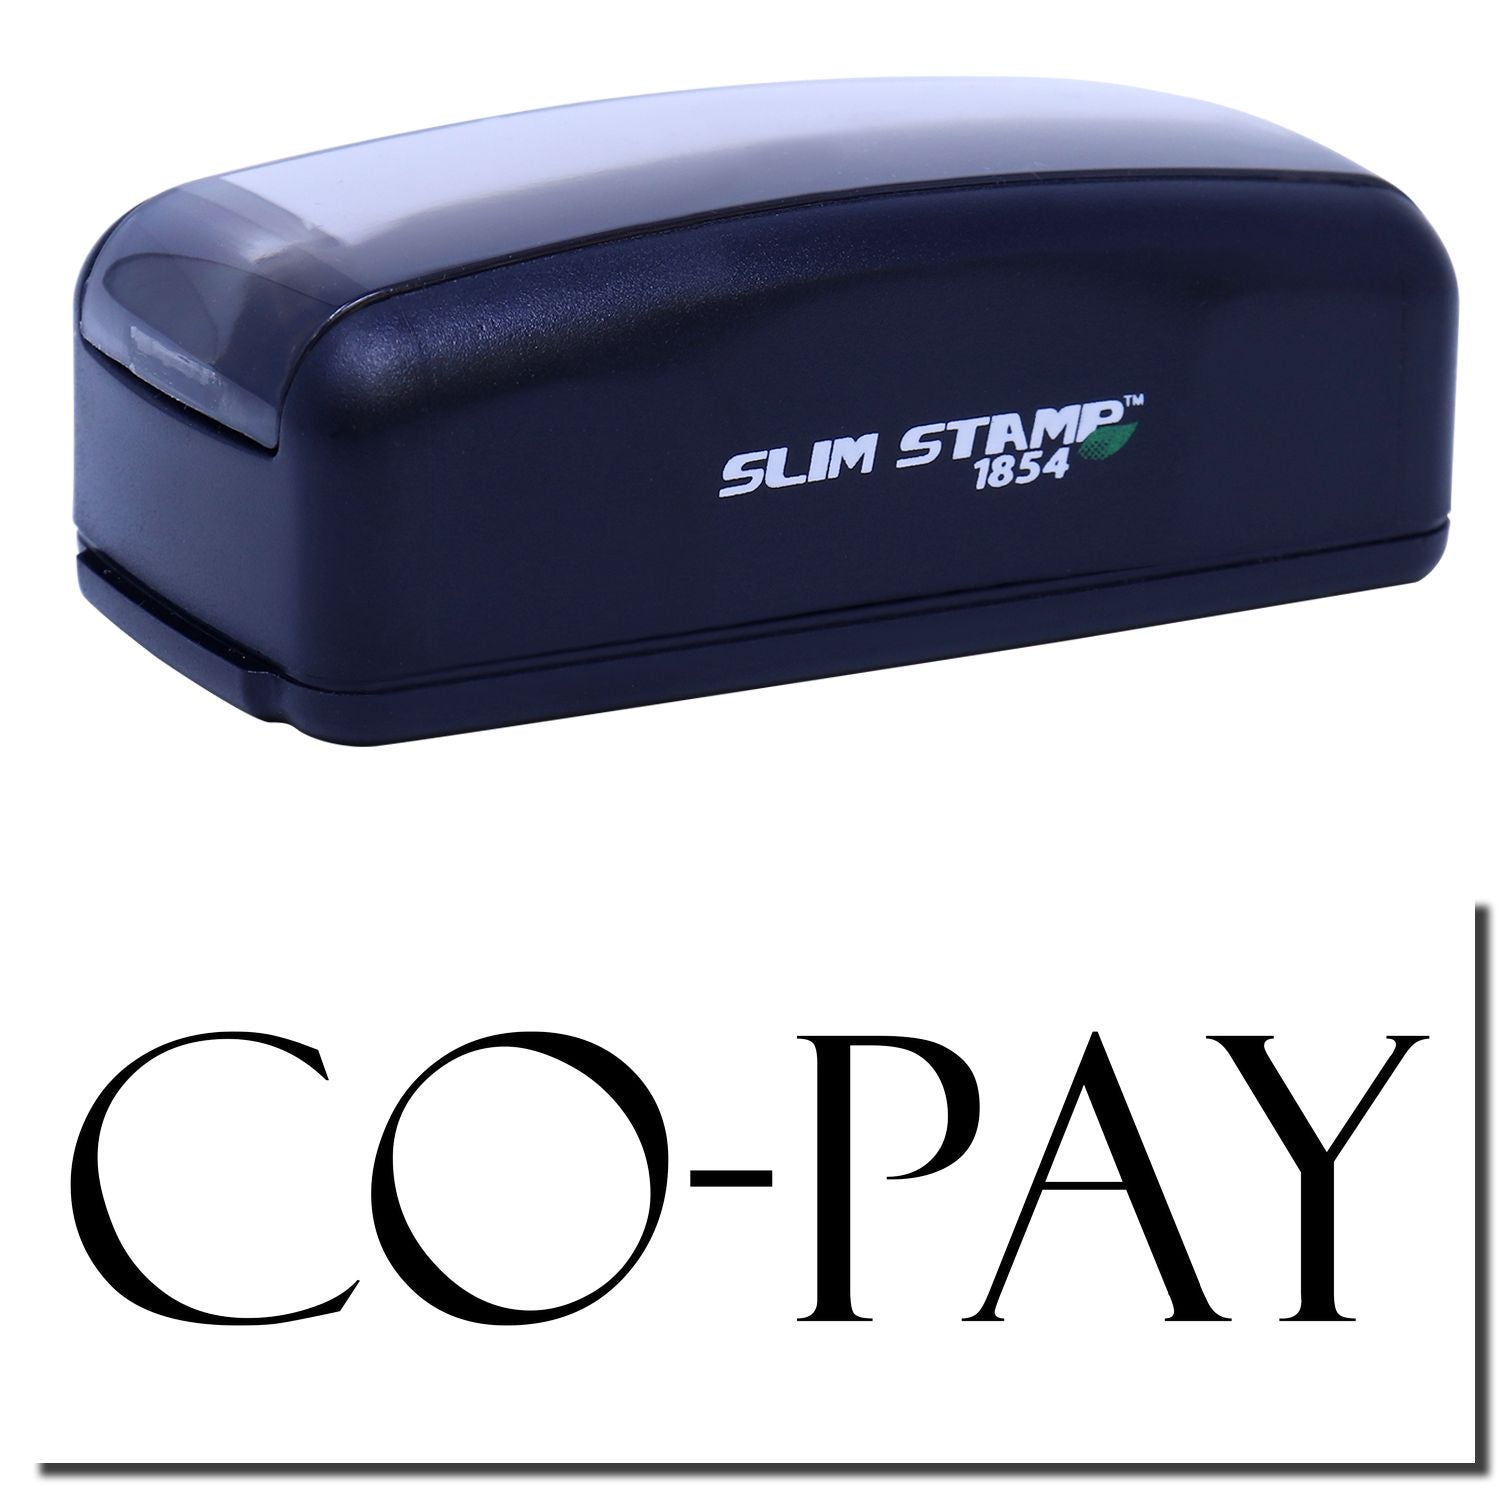 A stock office pre-inked stamp with a stamped image showing how the text "CO-PAY" in a large font is displayed after stamping.